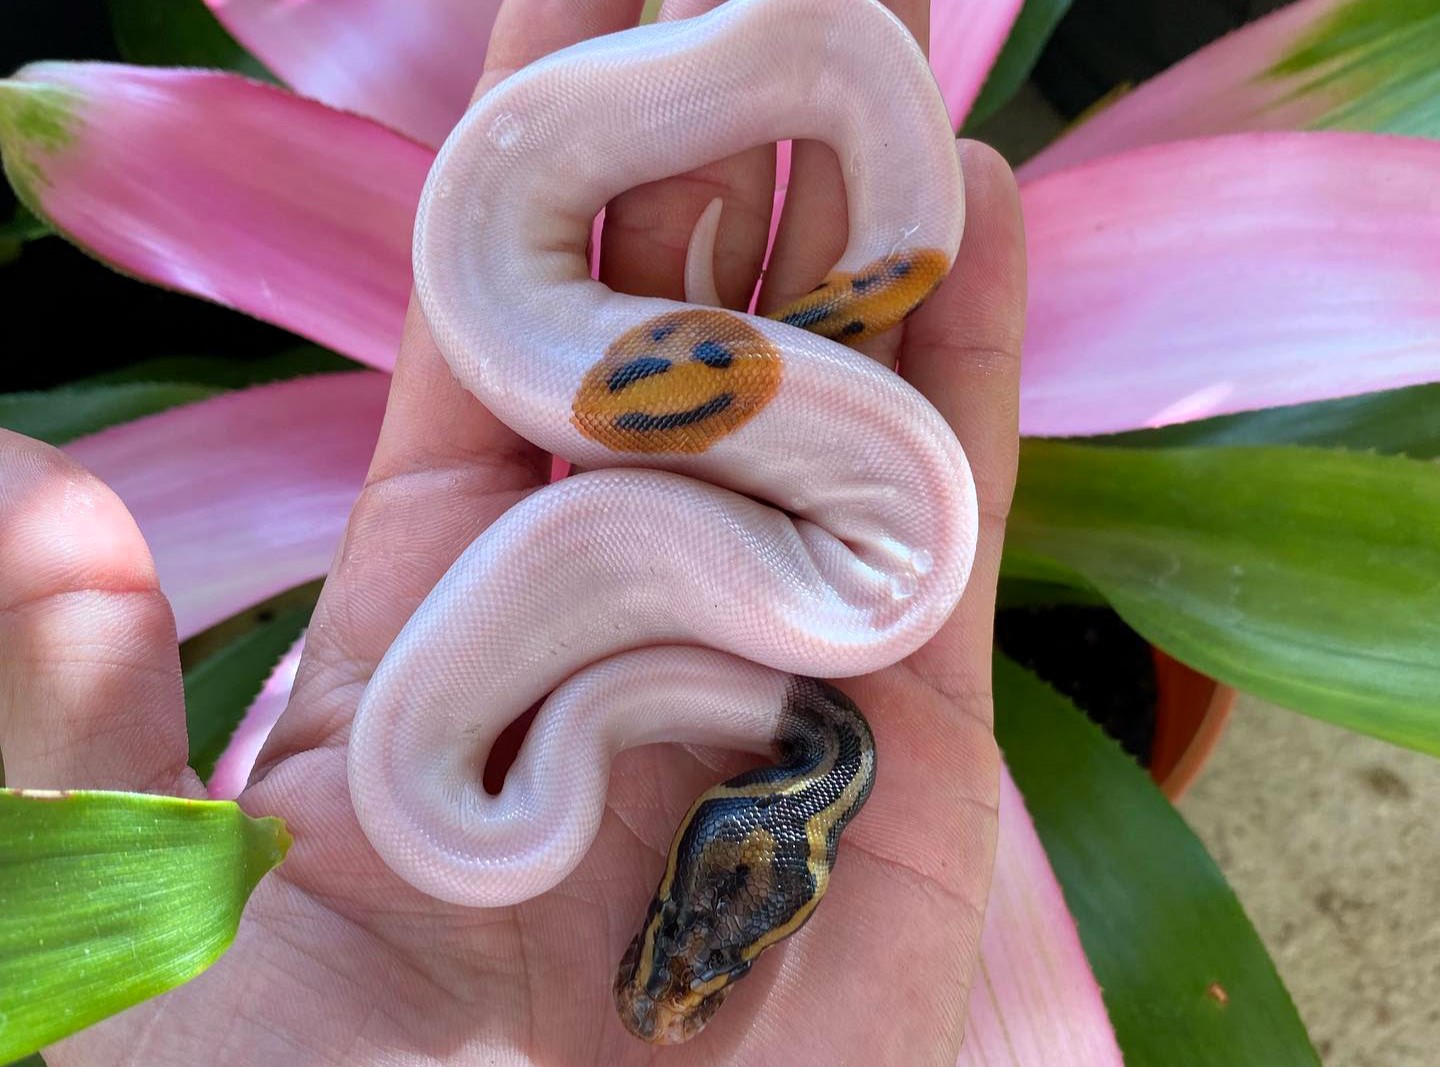 Meet the smiley-faced snake captivating the internet! A ball python with a unique pattern wows viewers, sparking fascination and admiration.